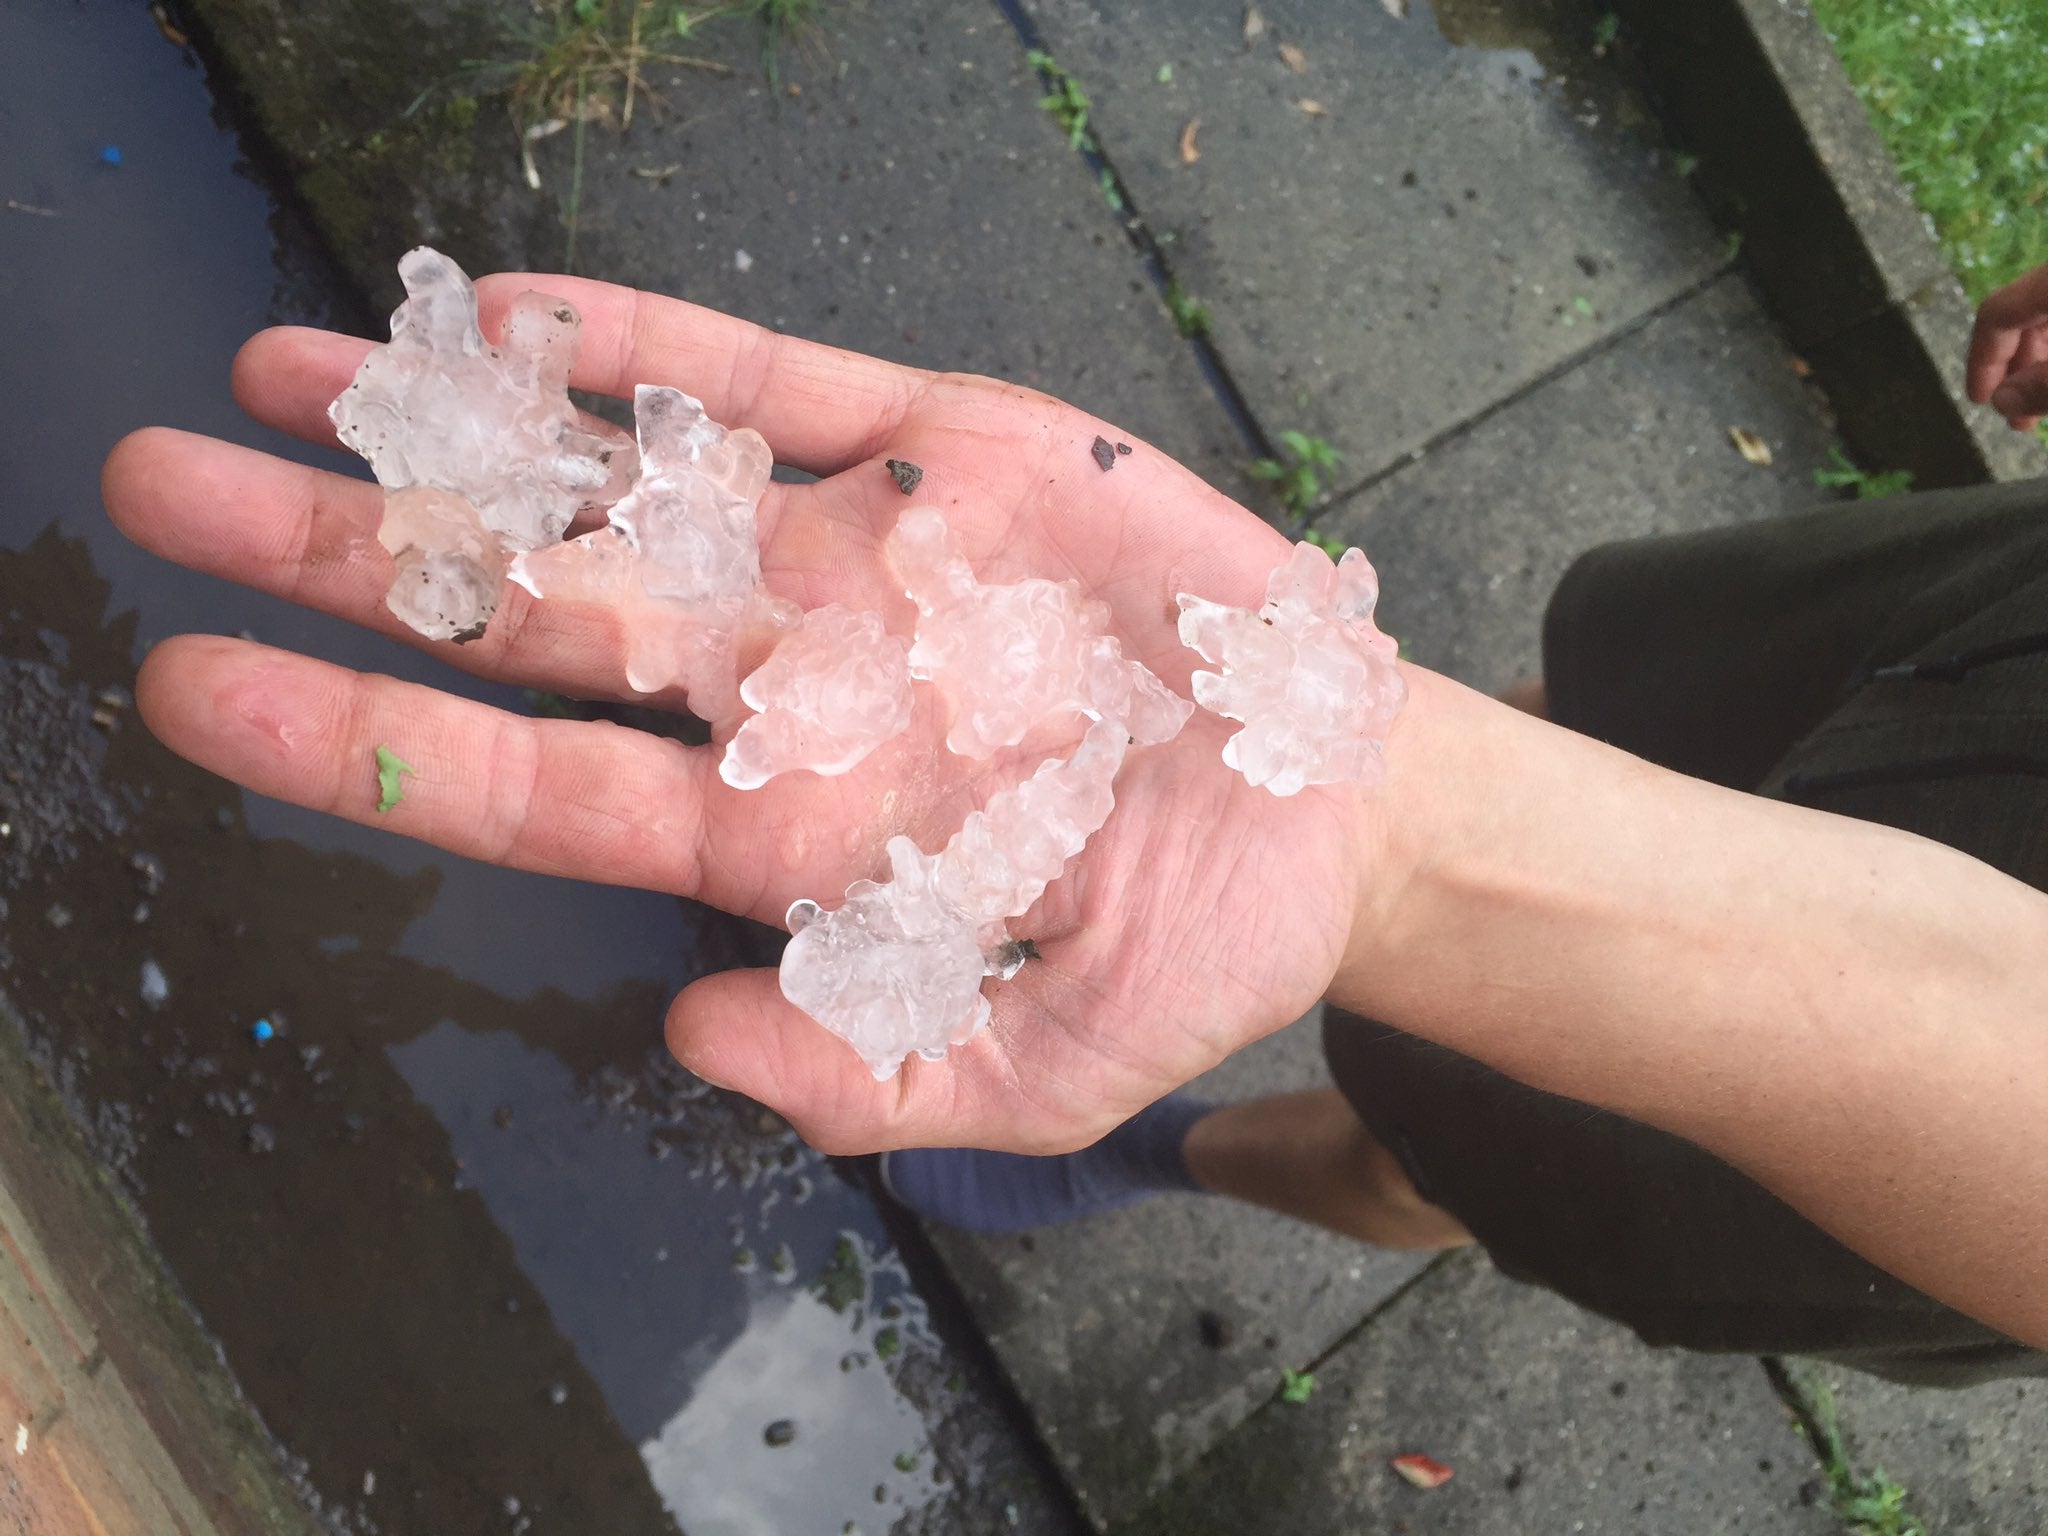 An image posted on social media shows hailstones that fell in Sheffield on Friday